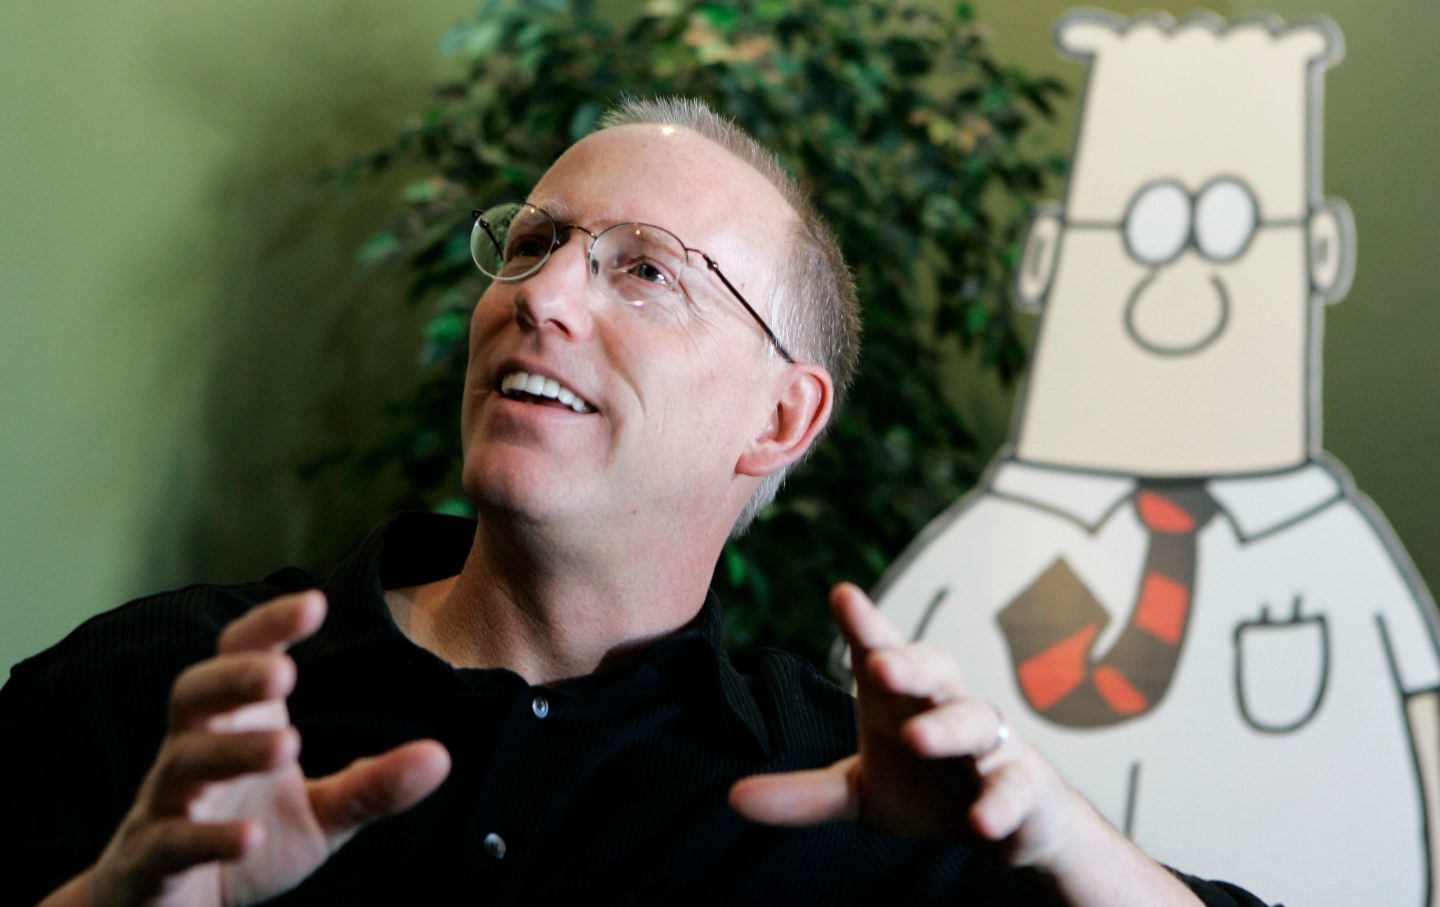 The Racist, Right-Wing Return of “Dilbert”